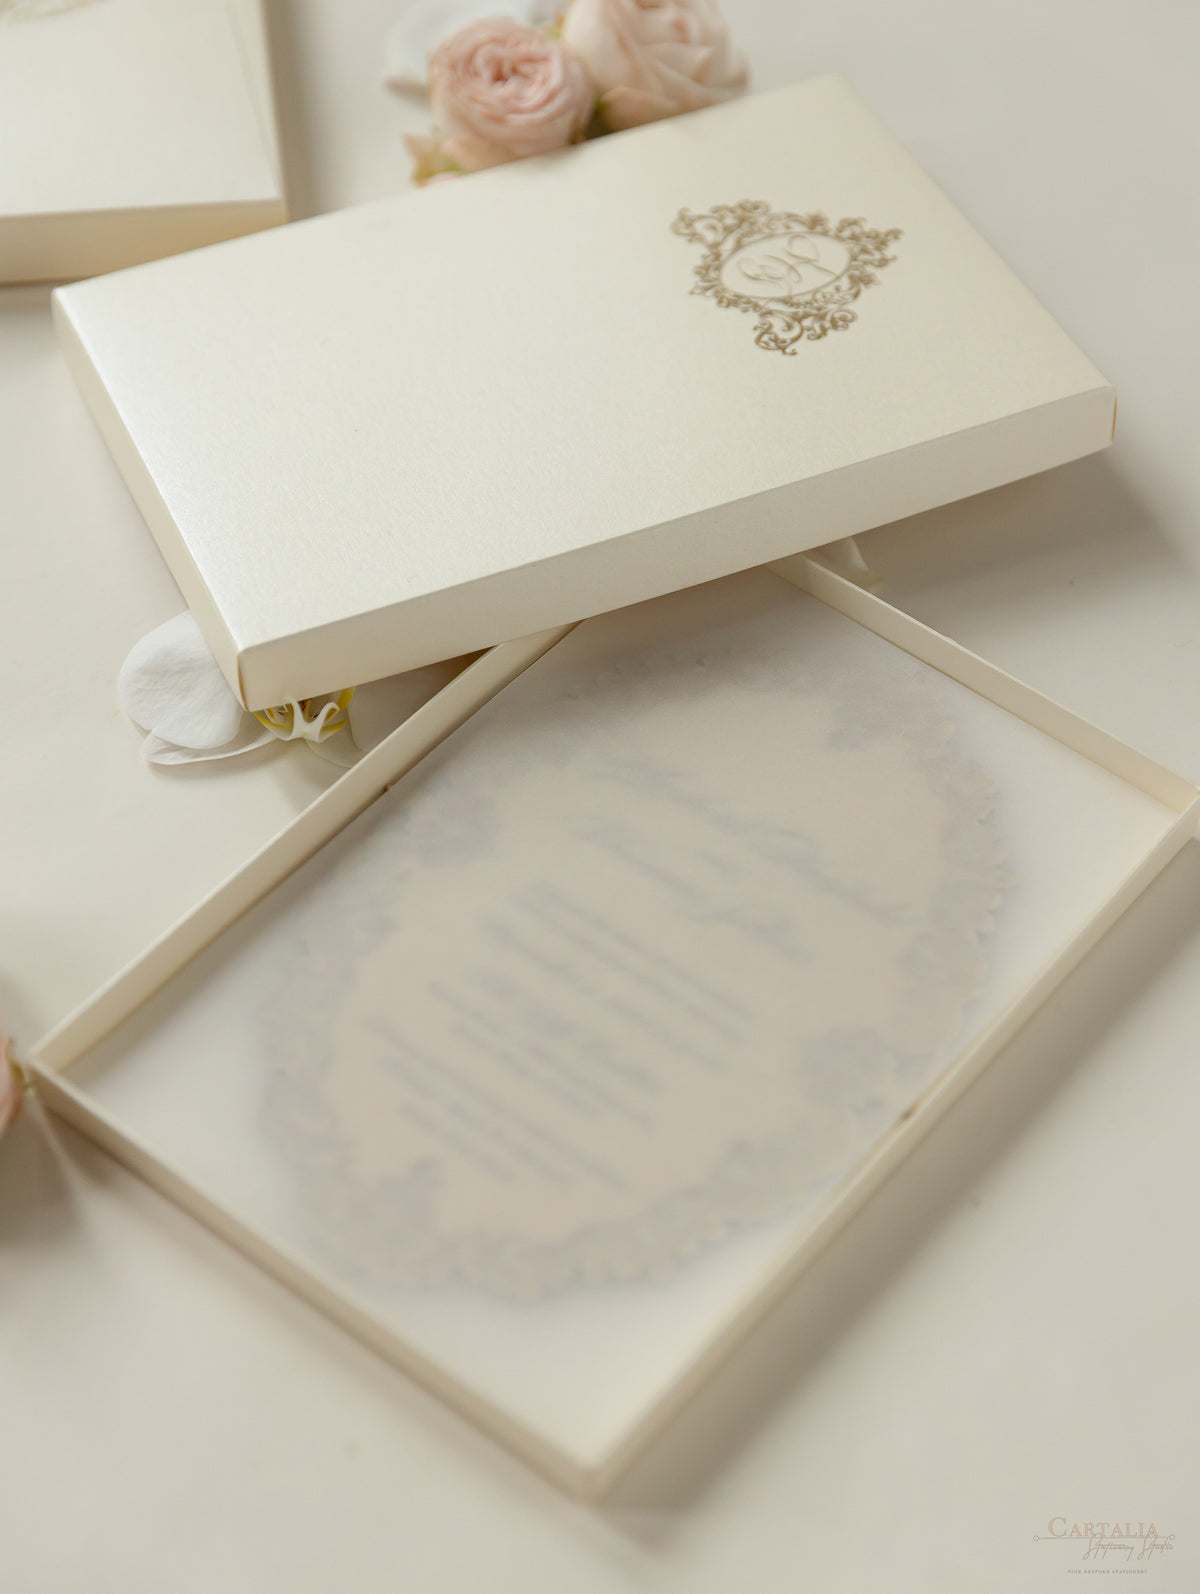 Mirror Acrylic Boxed Invitation in Custom Box and Boxed Envelope |  Bespoke Commission K&T